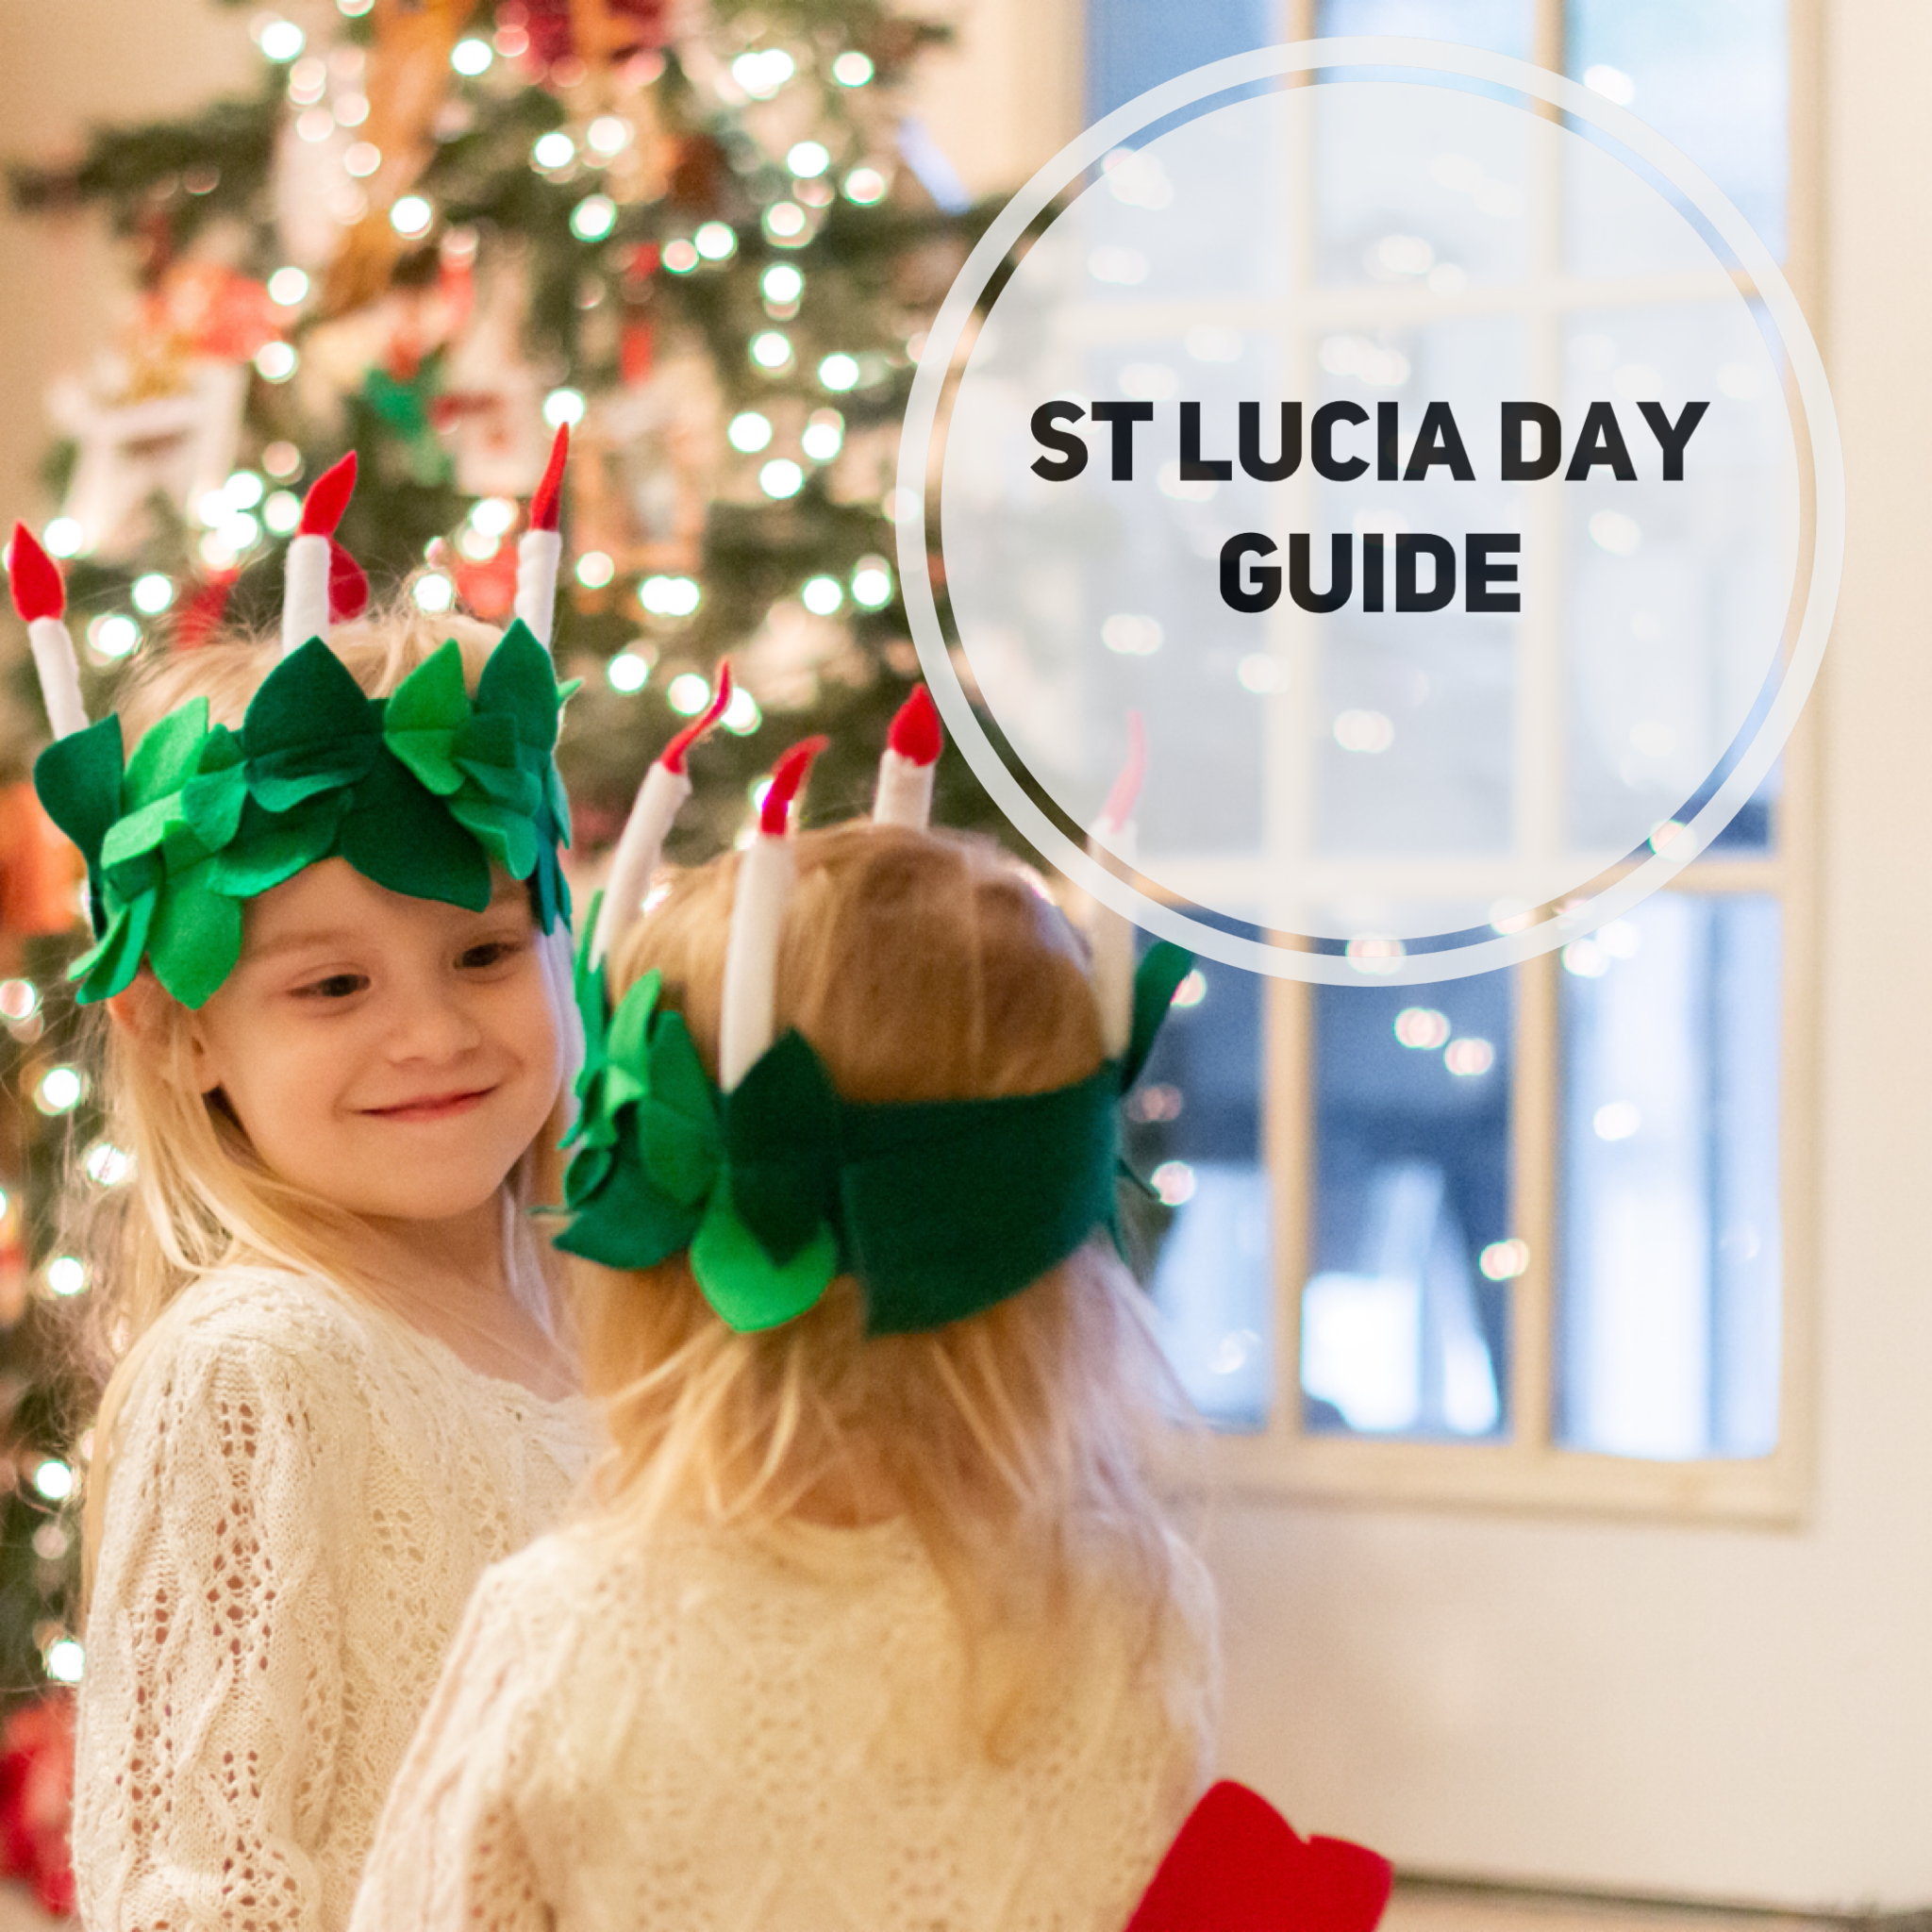 St lucia day guide â ascetic life of motherhood